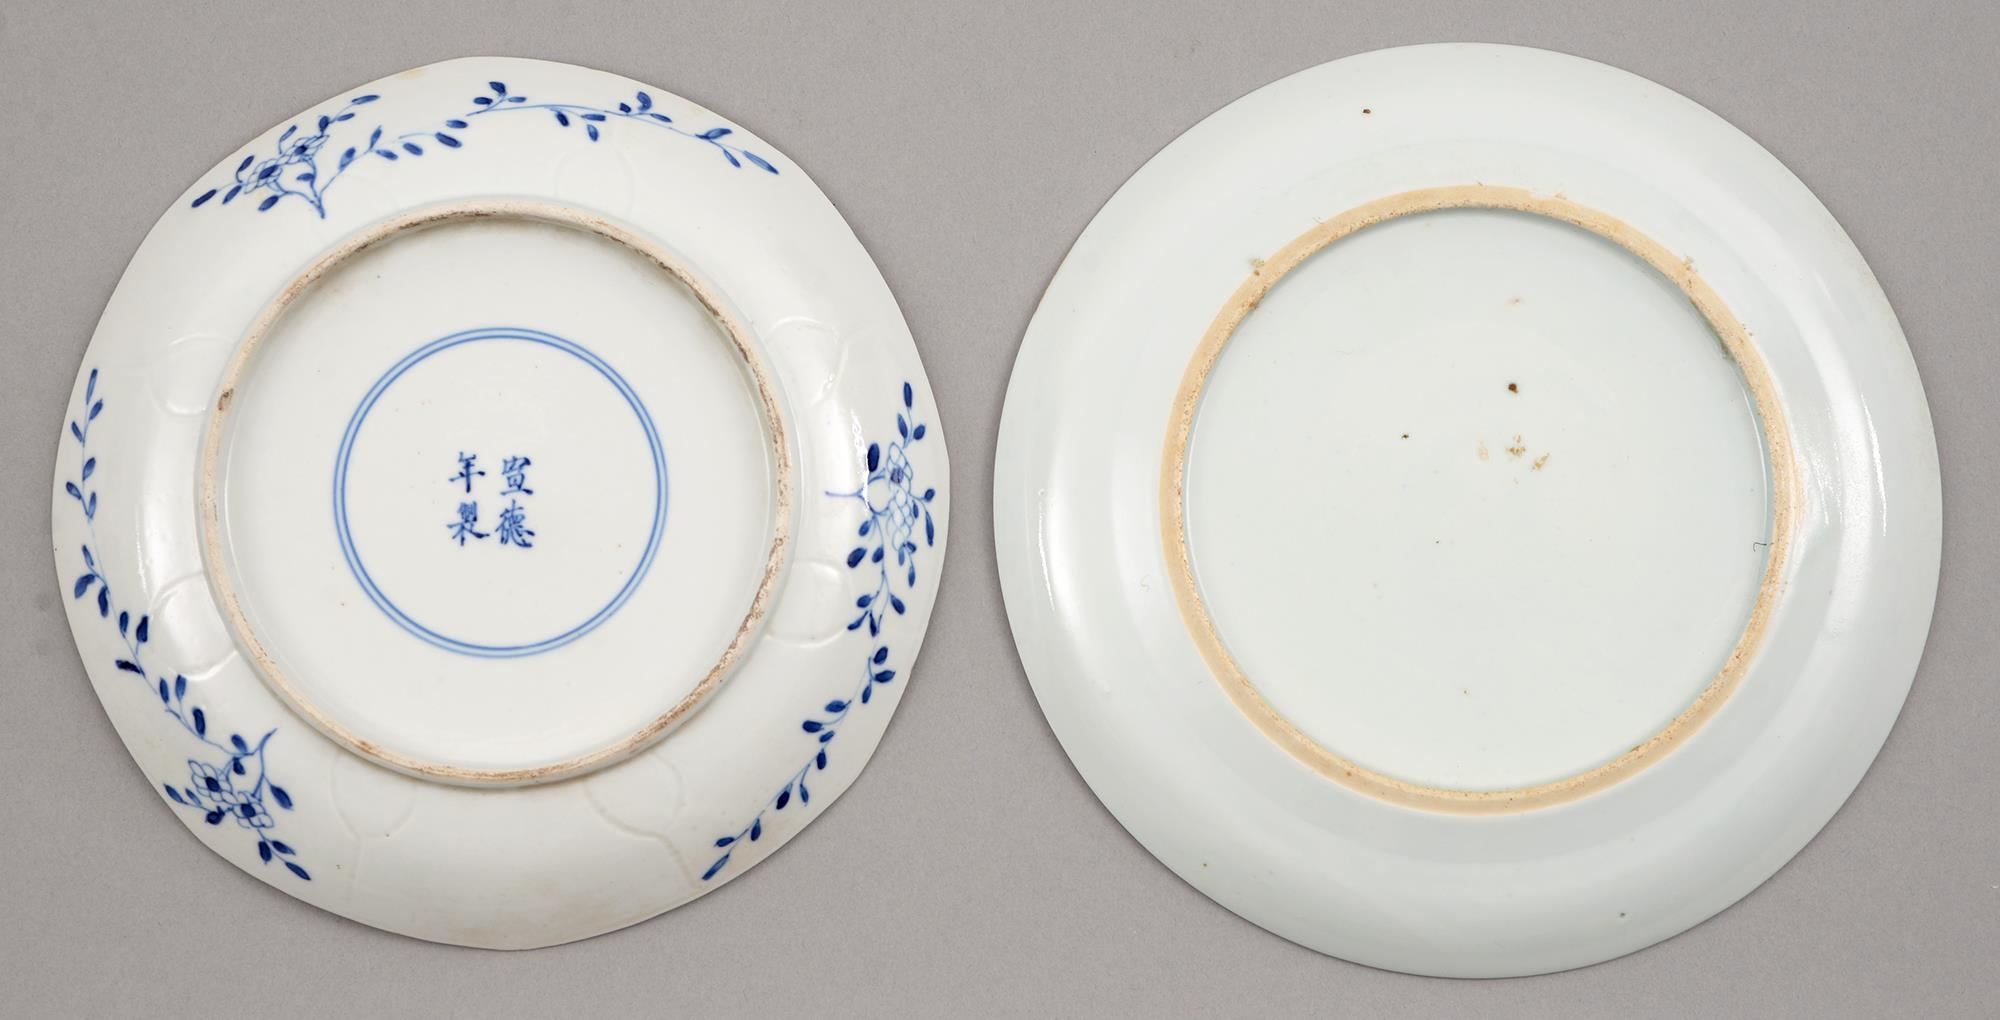 Two Chinese blue and white plates, 18th and 19th c, painted with flowering plants in panelled border - Image 2 of 2